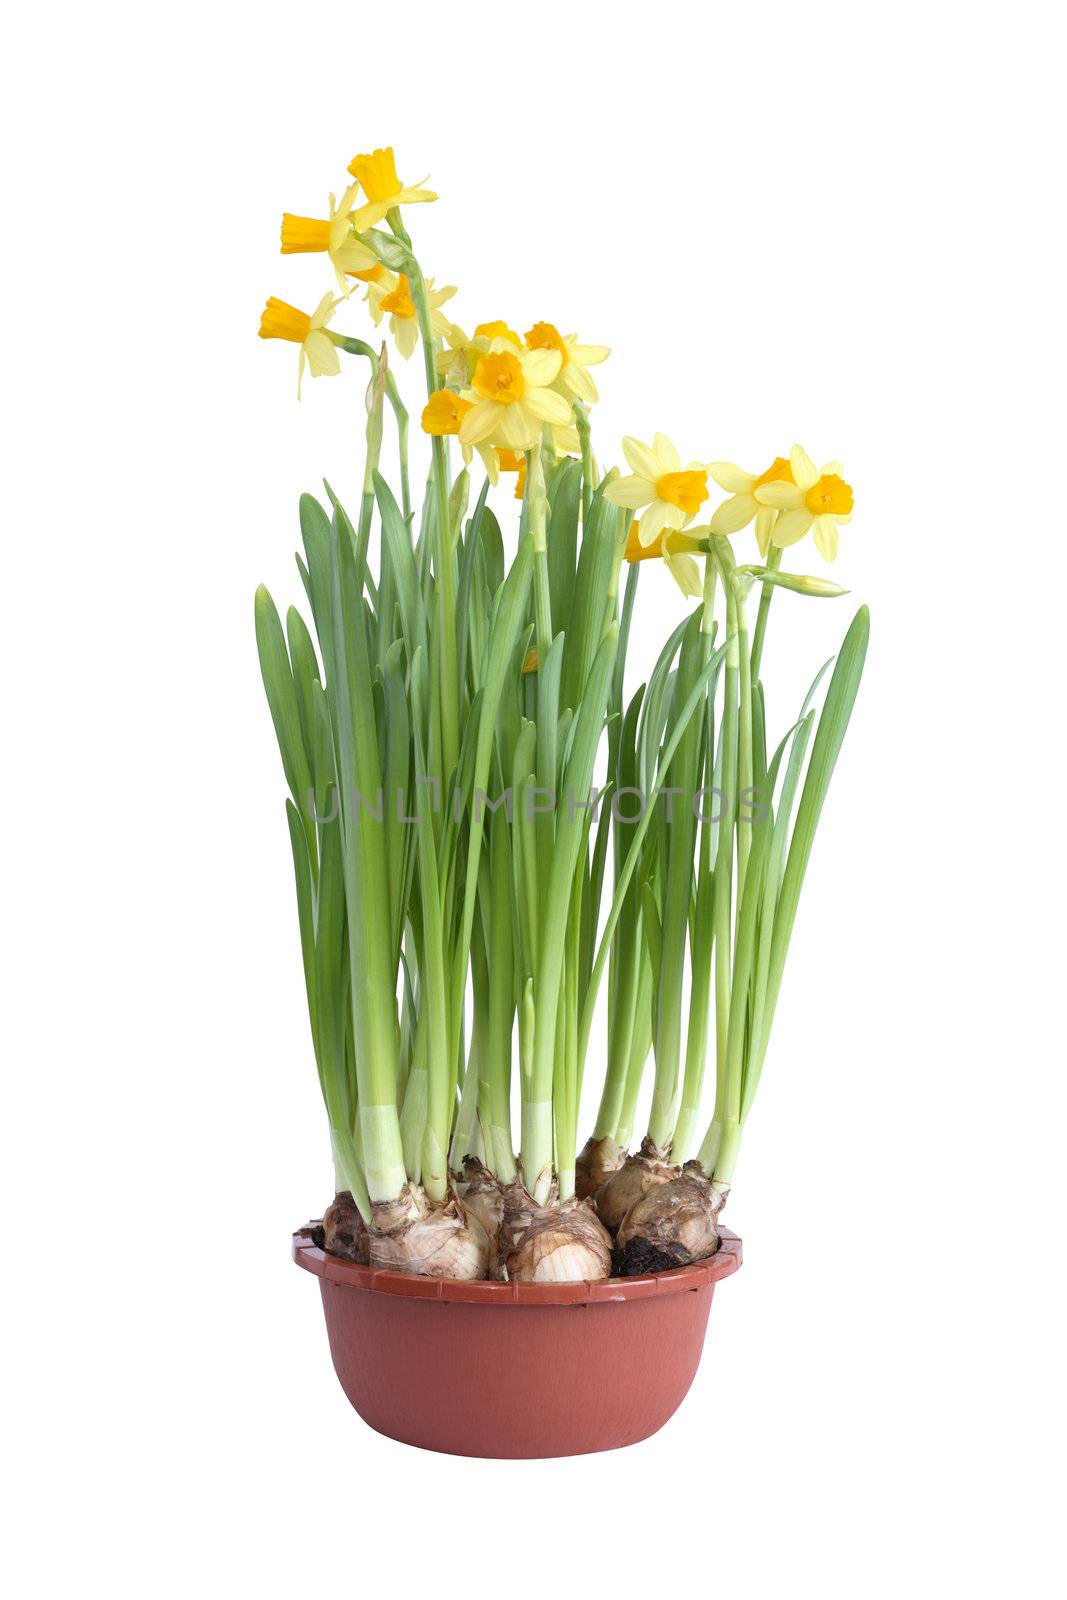 Flower pot with nice yellow daffodils on white background. Isolated with clipping path